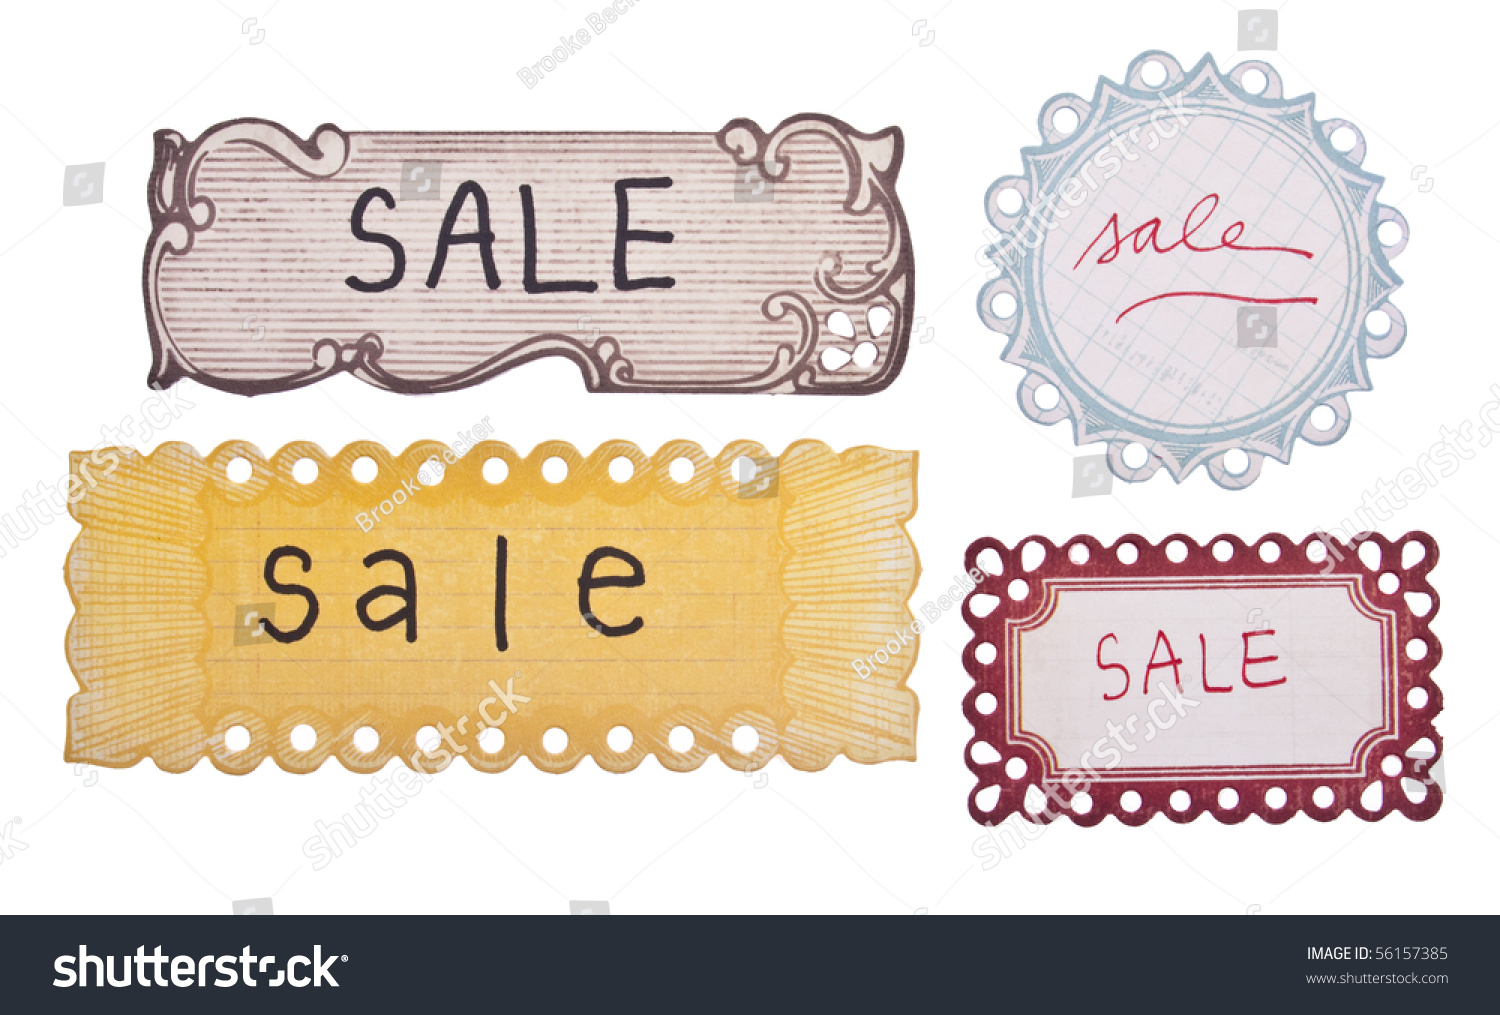 Handwritten Sale Tags with a Vintage Modern Style. #56157385